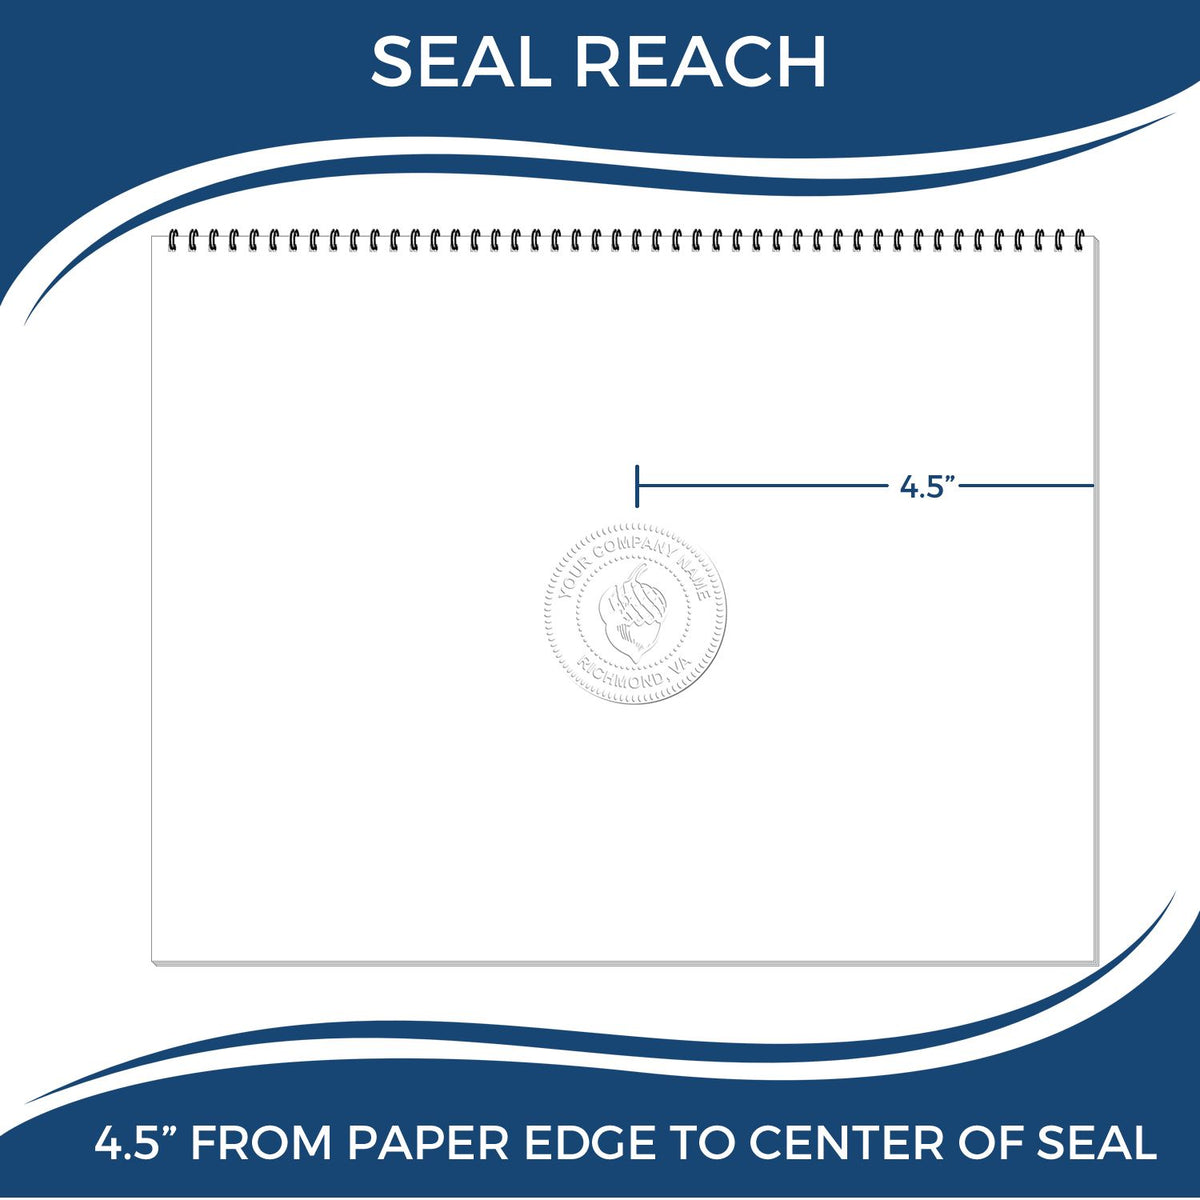 An infographic showing the seal reach which is represented by a ruler and a miniature seal image of the Extended Long Reach Delaware Architect Seal Embosser